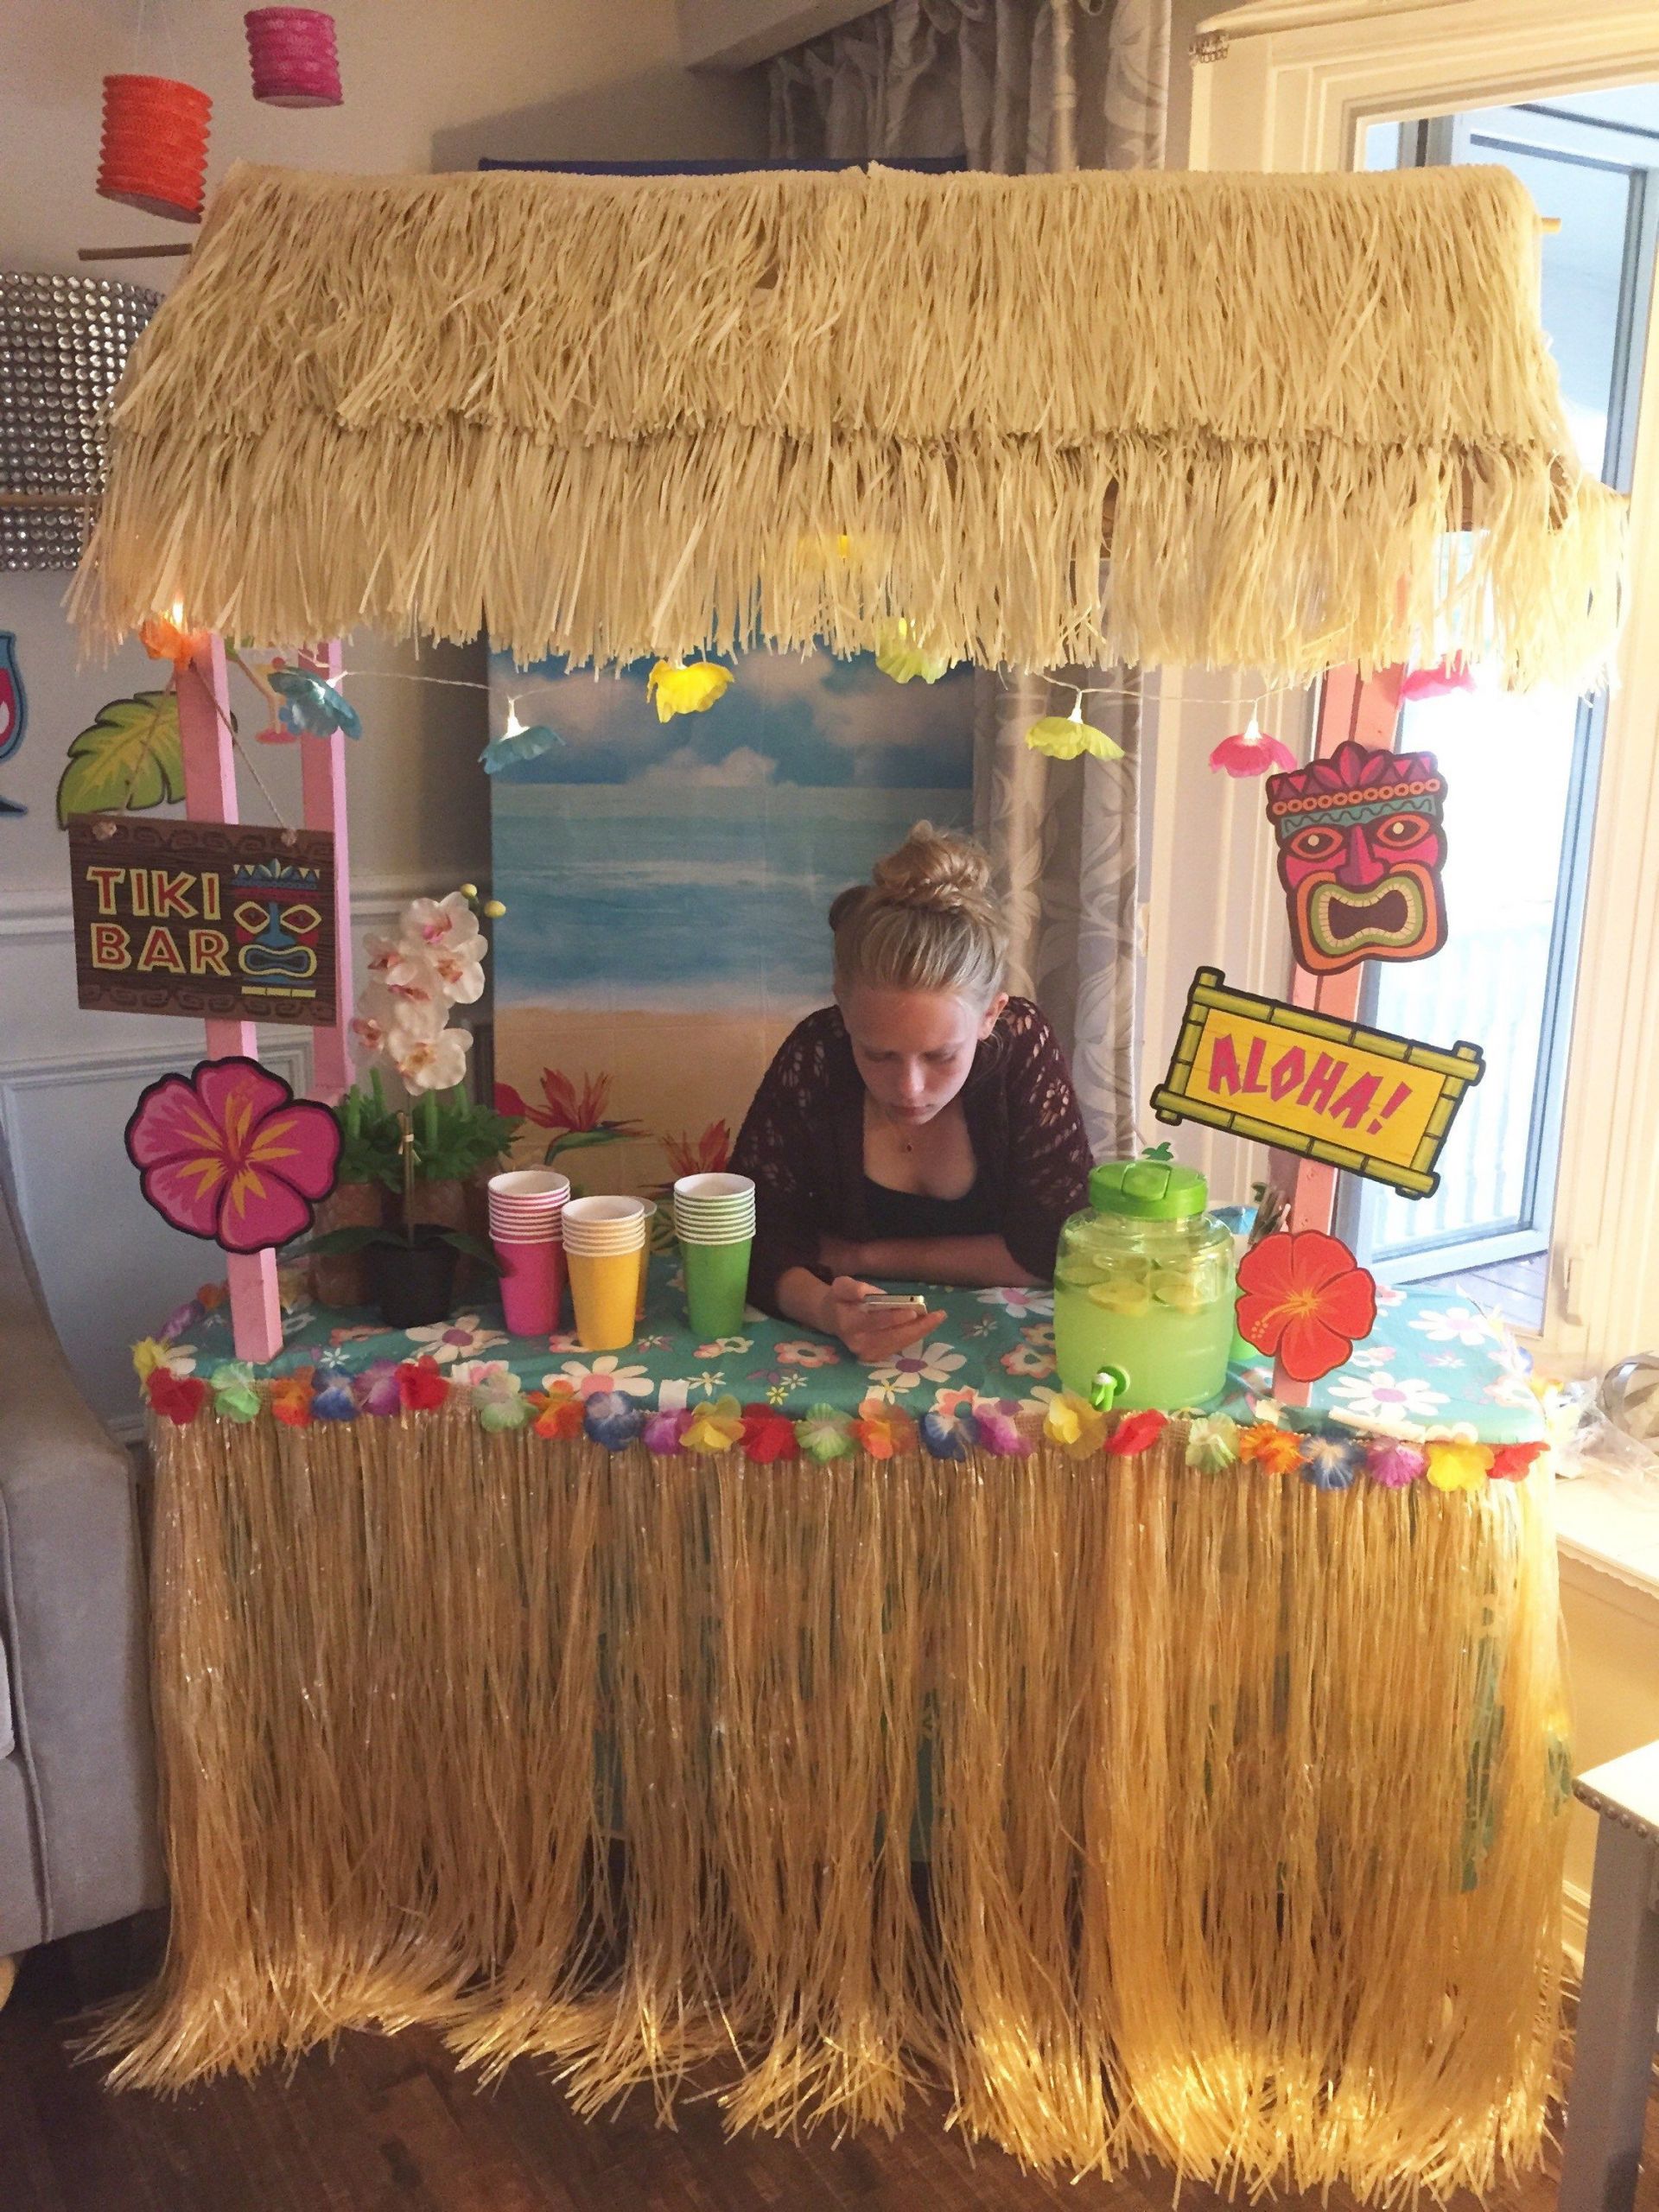 Indoor Beach Party Ideas For Adults
 DIY Tiki Bar daddy daughter dance